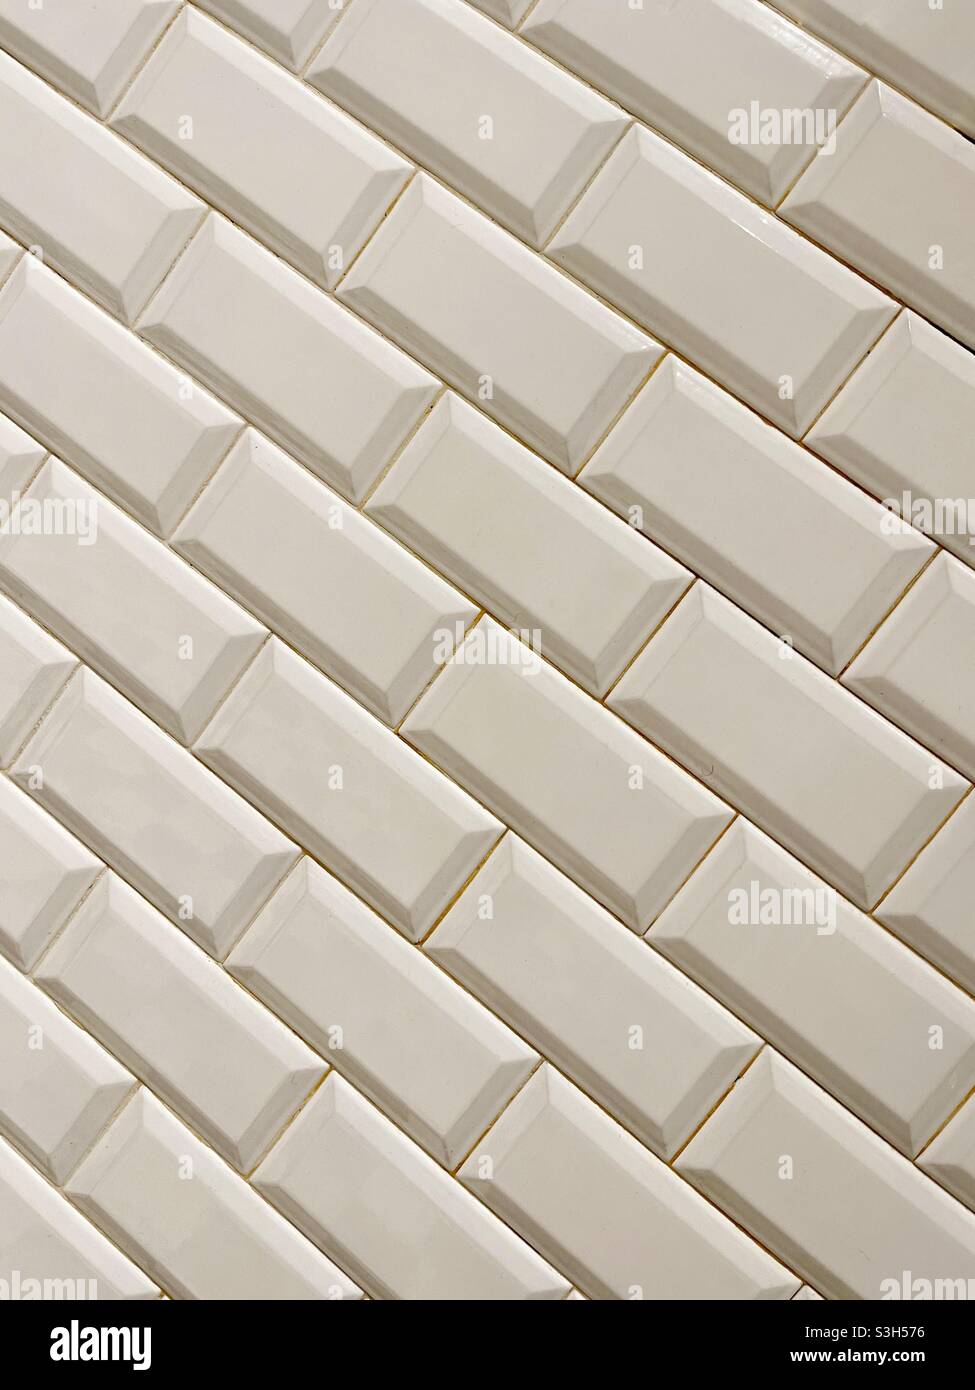 Diagonal pattern of white bevelled tiles on an interior wall Stock Photo